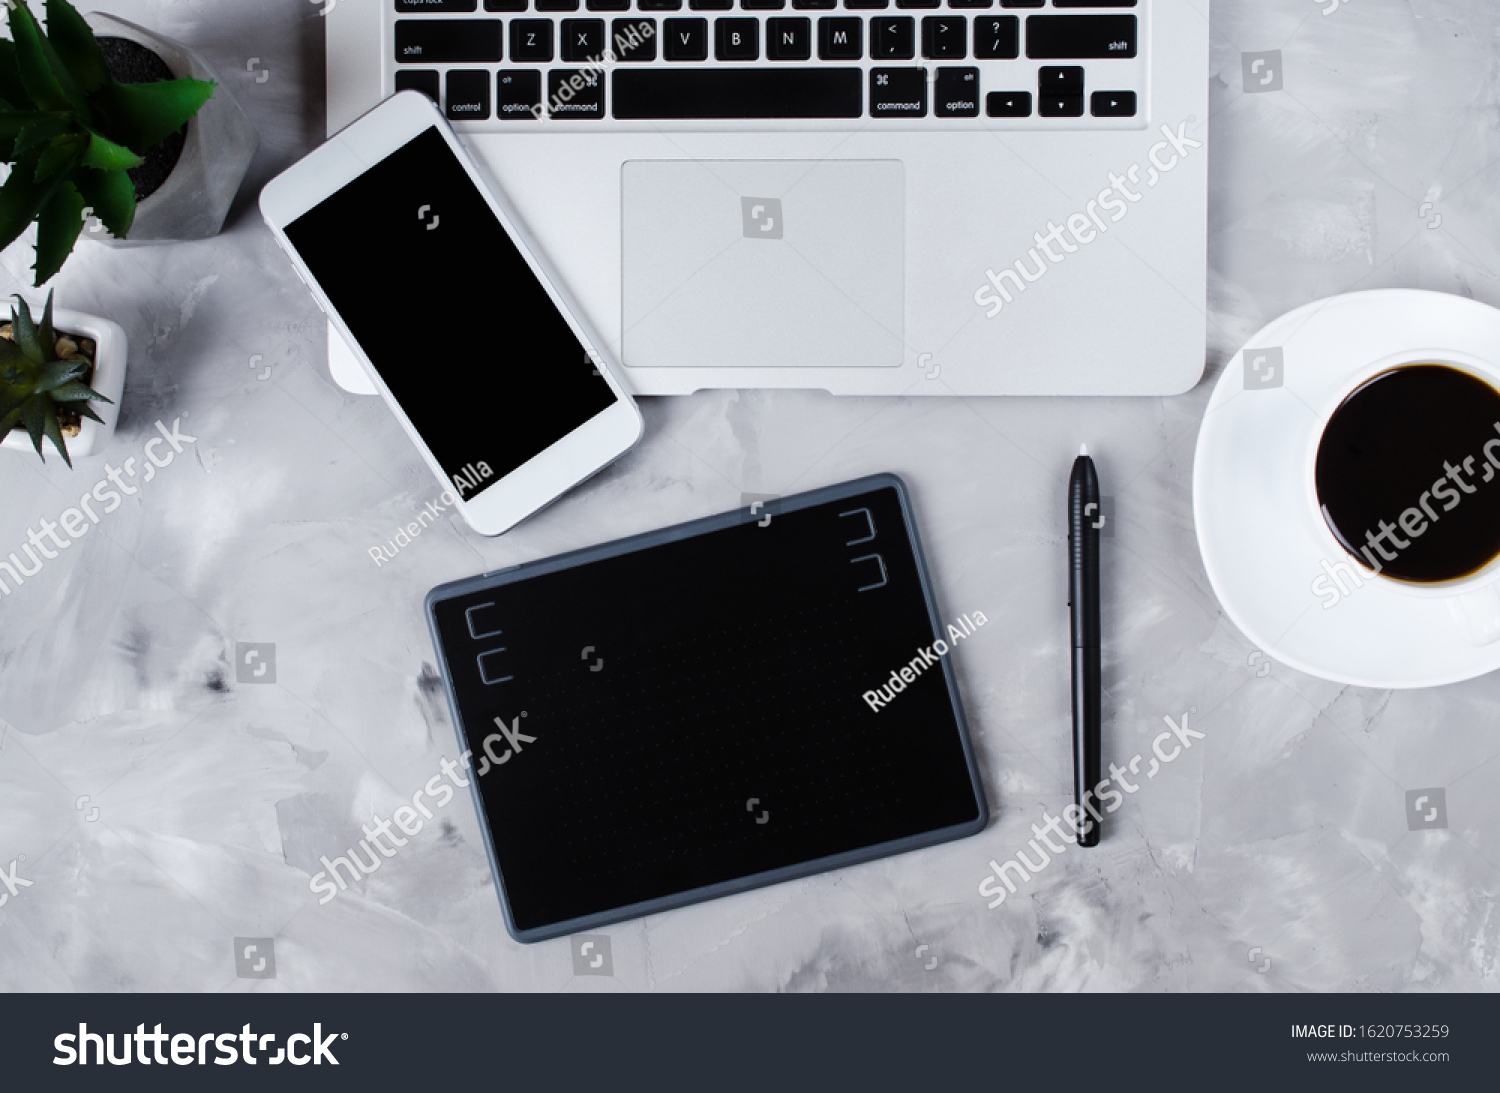 Overhead view of graphic tablet, graphic pen, smartphone, laptop and a cup of black coffee. #1620753259